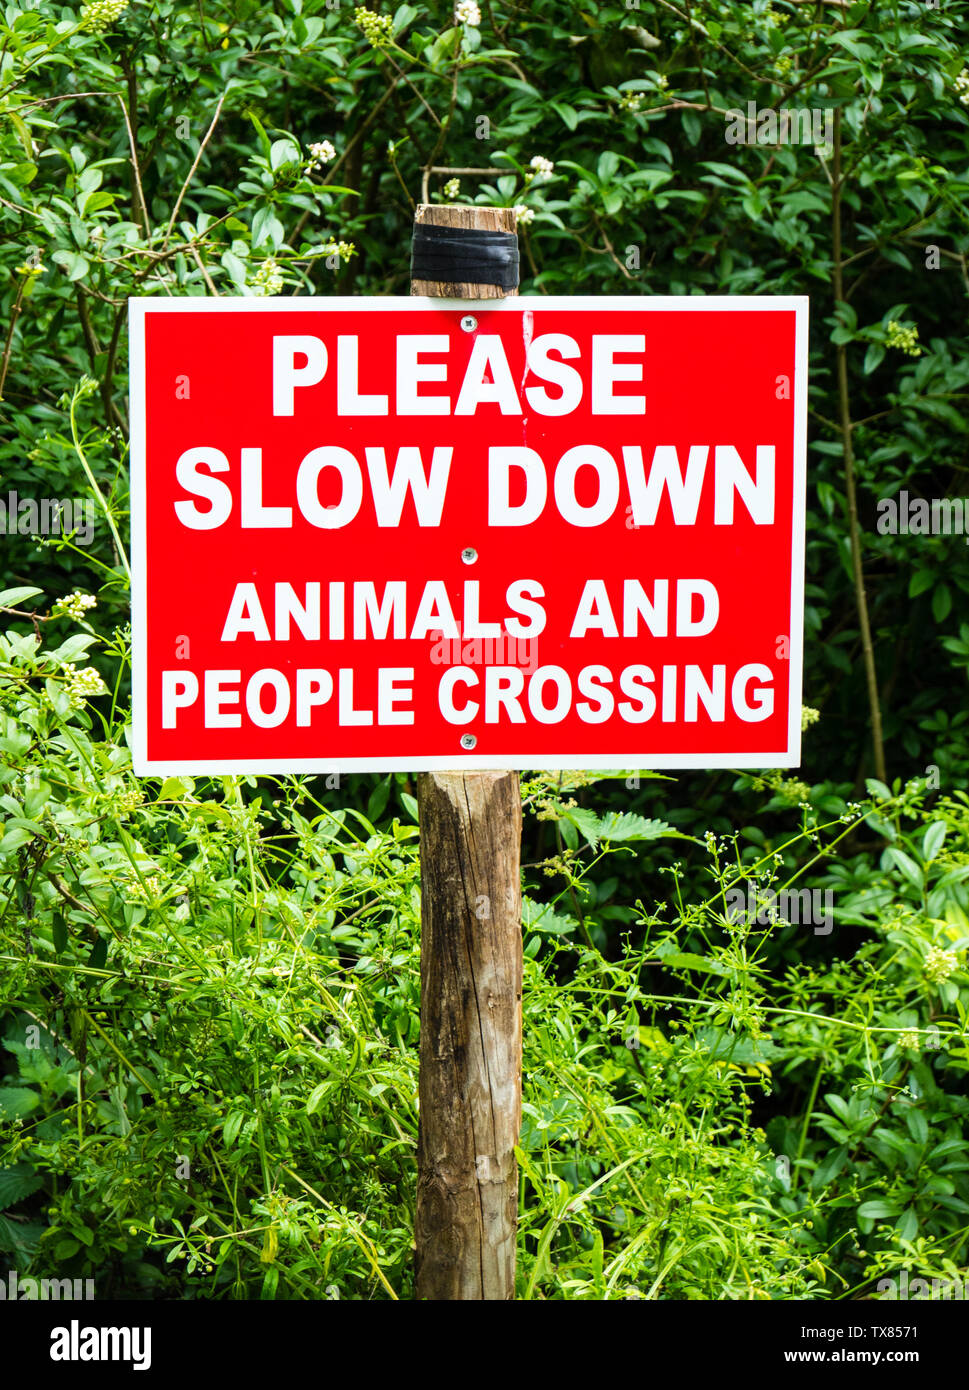 Please Slow Down, Animals and People Crossing, Sign, Streatley, Berkshire, England, UK, GB. Stock Photo